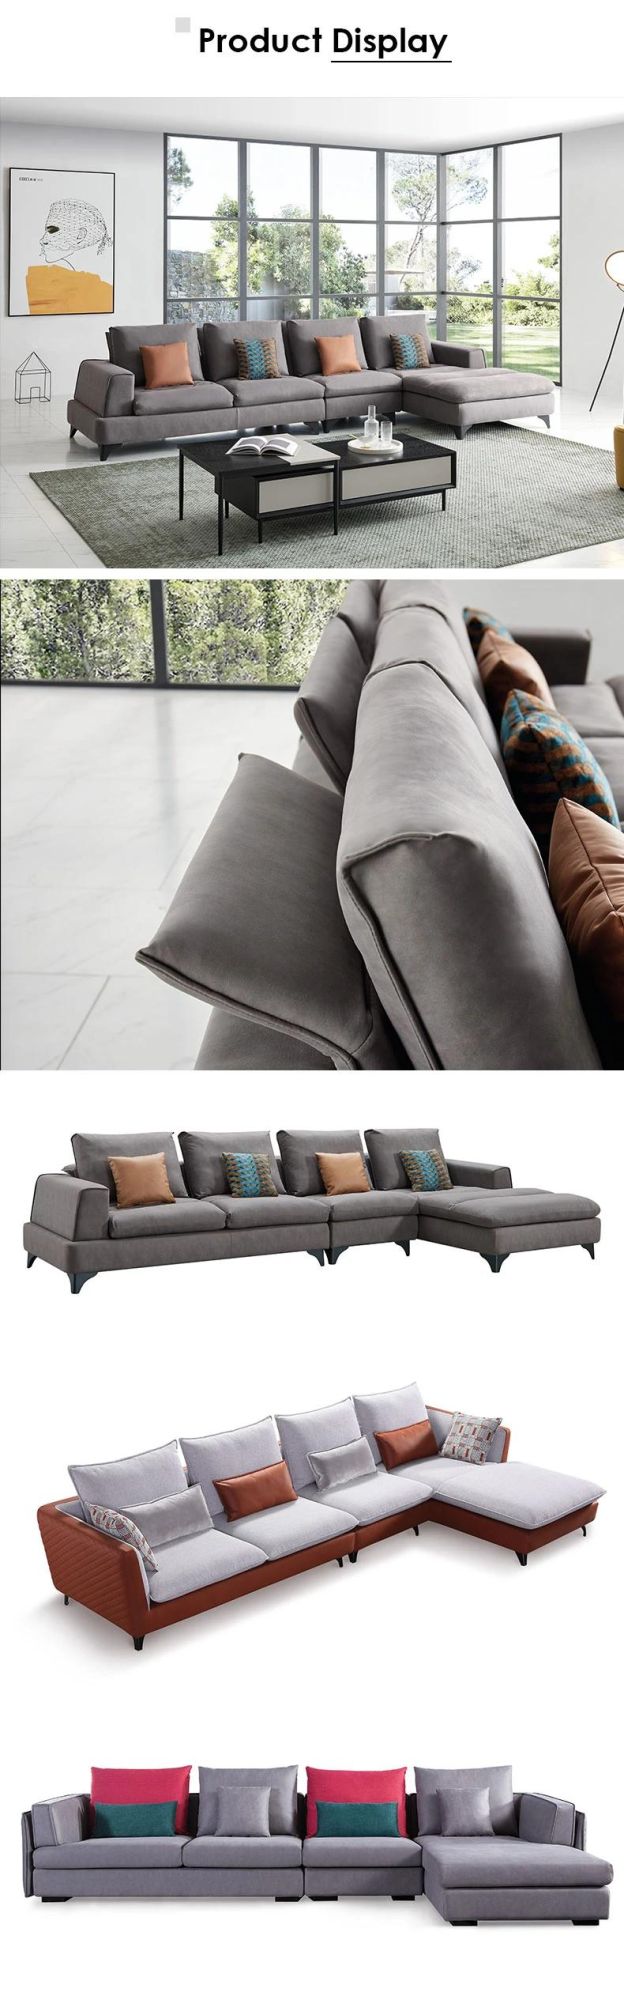 Modern Sofa Gery Leathaire Living Room Furniture with Wood Frame